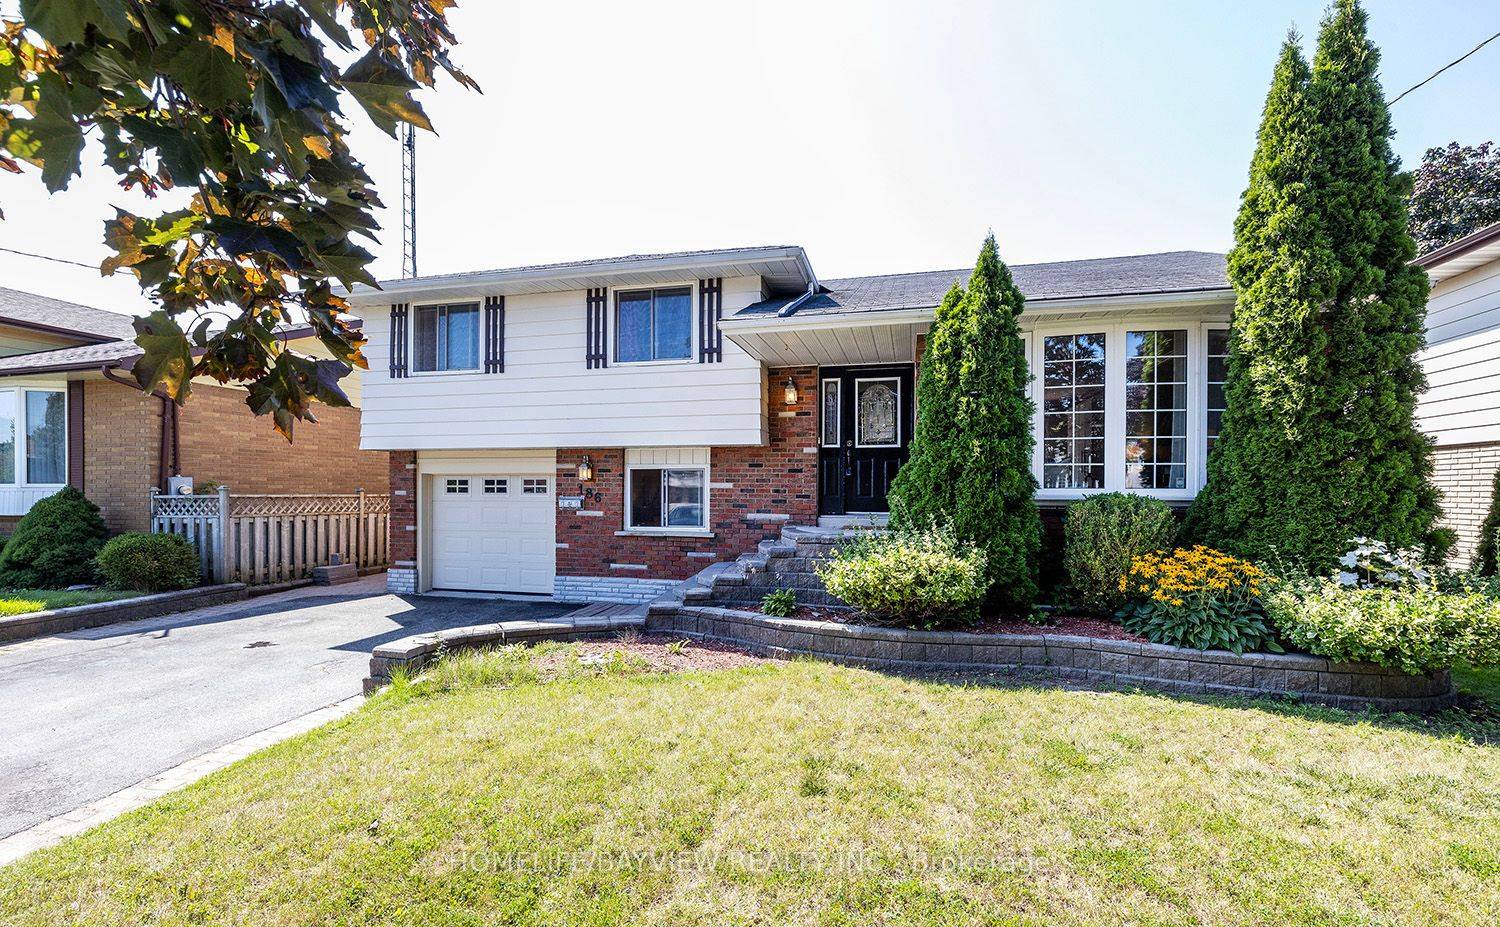 Welcome to this Delightful sun filled spacious updated 5 level side split nestled in the heart of the lively Donevan neighborhood !